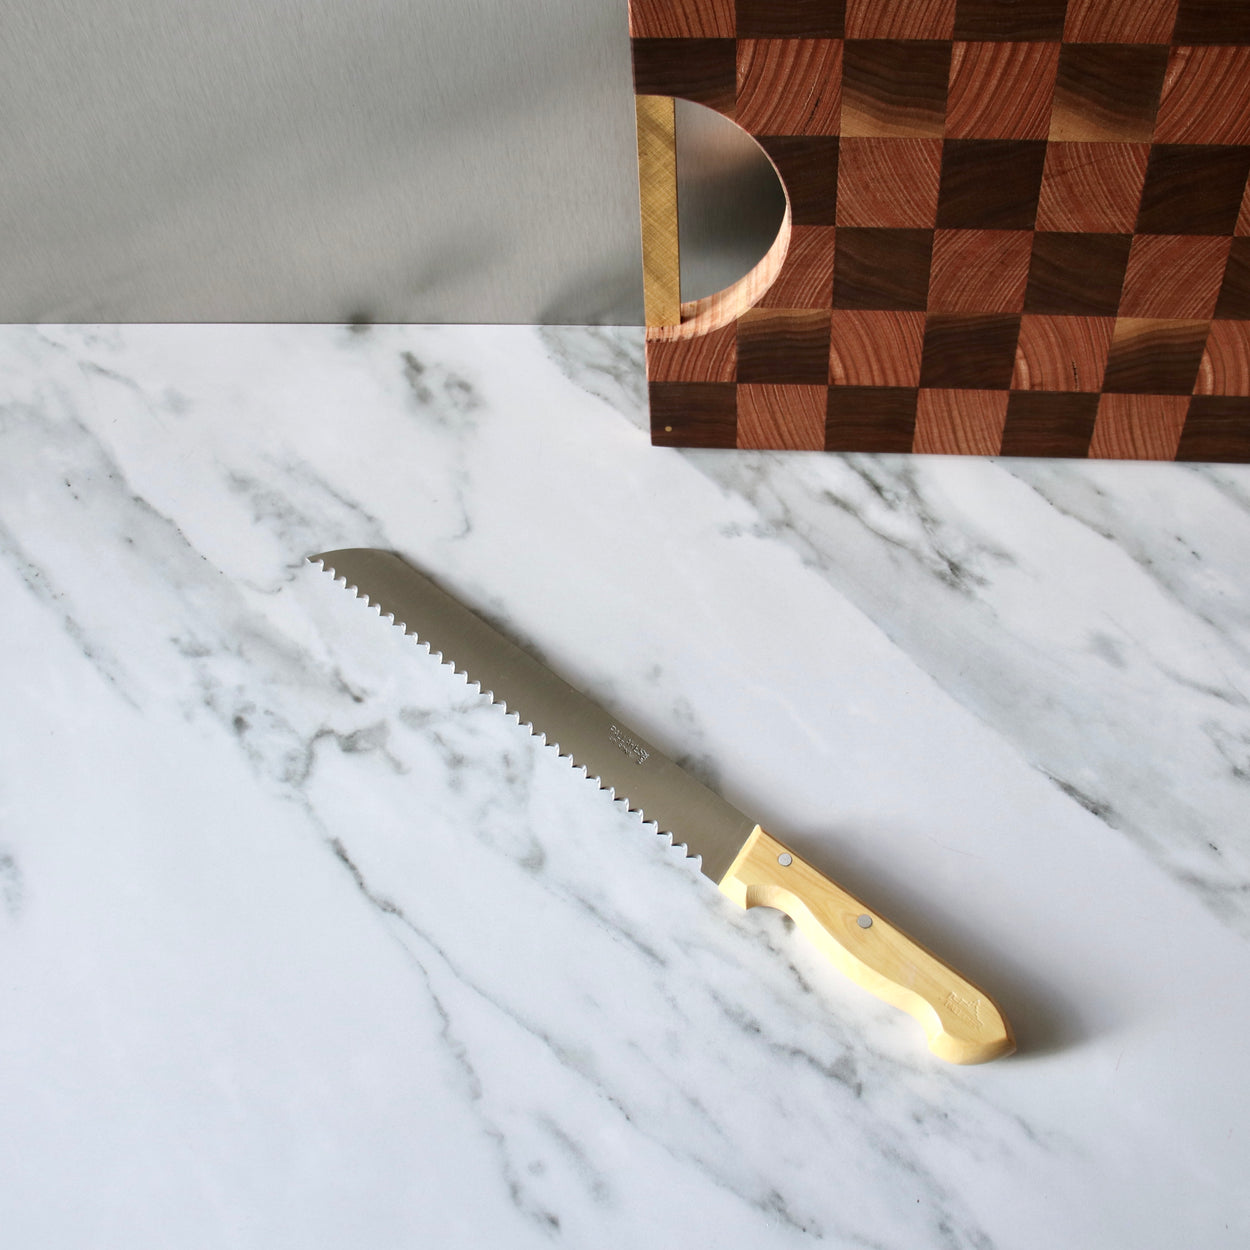 Pallares Solsona 25cm Box Wood Stainless Steel Bread Knife on marble bench with chopping board in background.